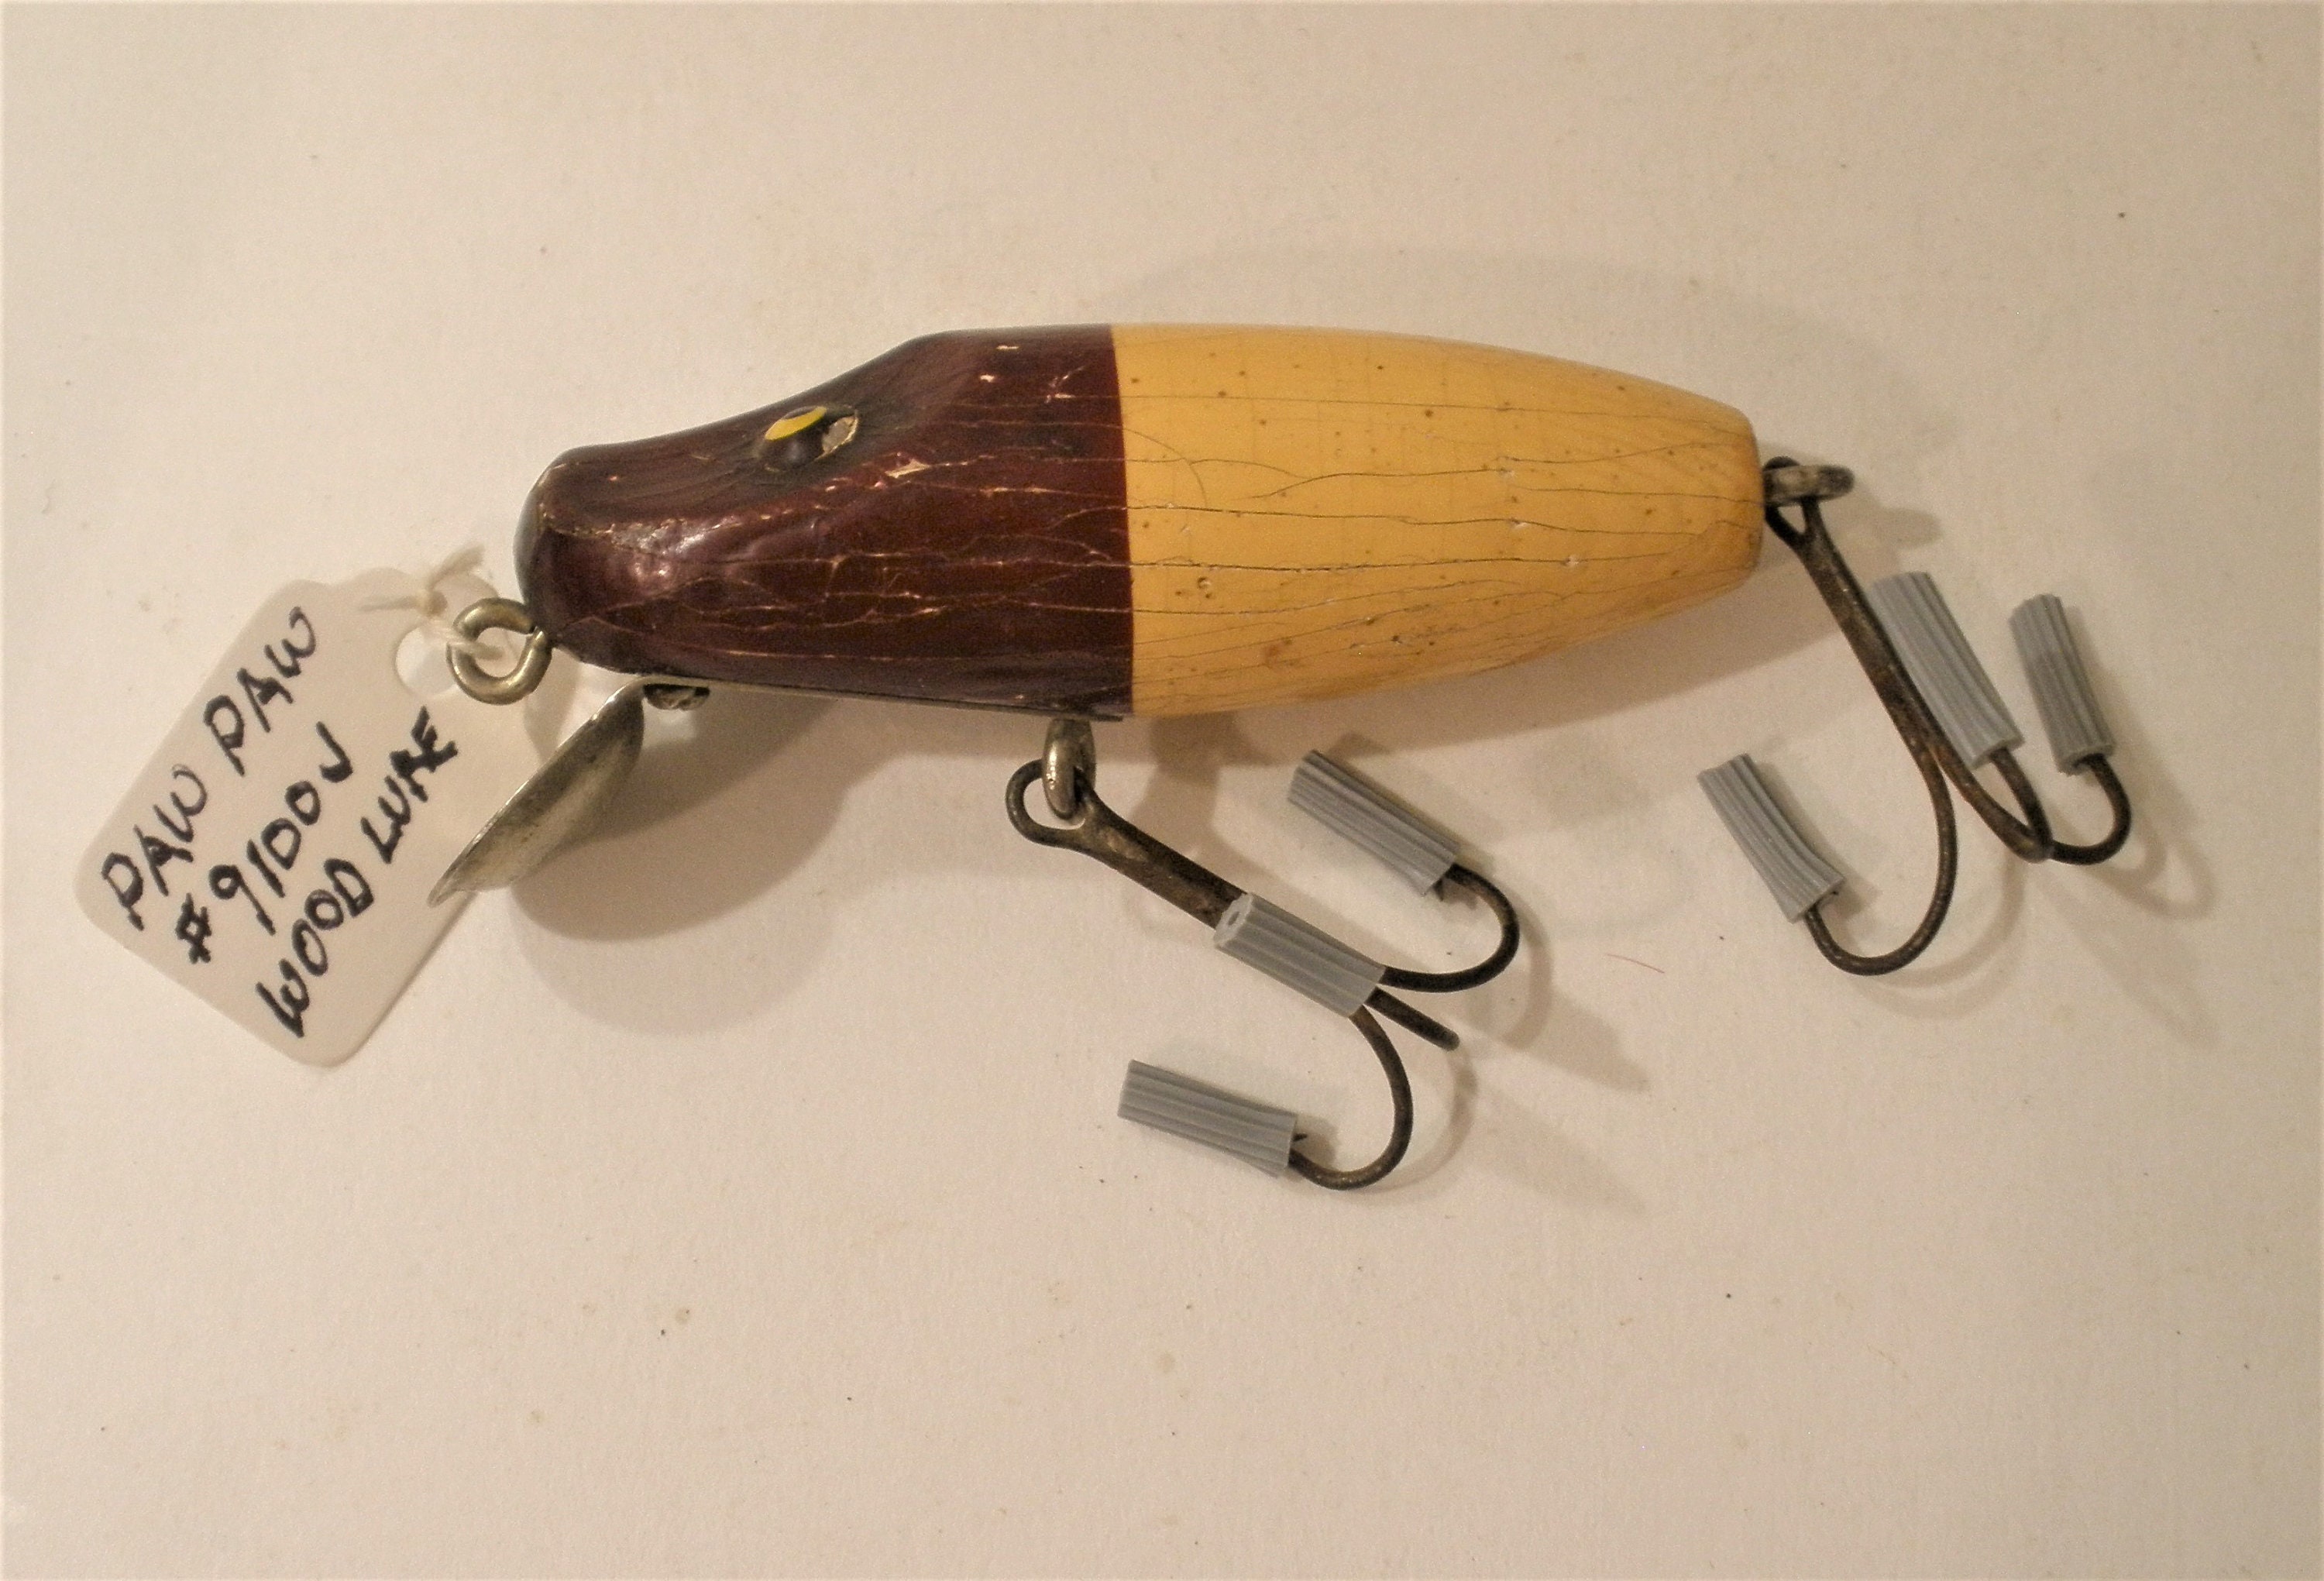 Vintage Paw Paw Lure / 9100-J Series Paw Paw Bait Co. / Issued 1950 / Wood  Lure / All Original / Nice Lure / Collectible / Great Gift Items -   Canada